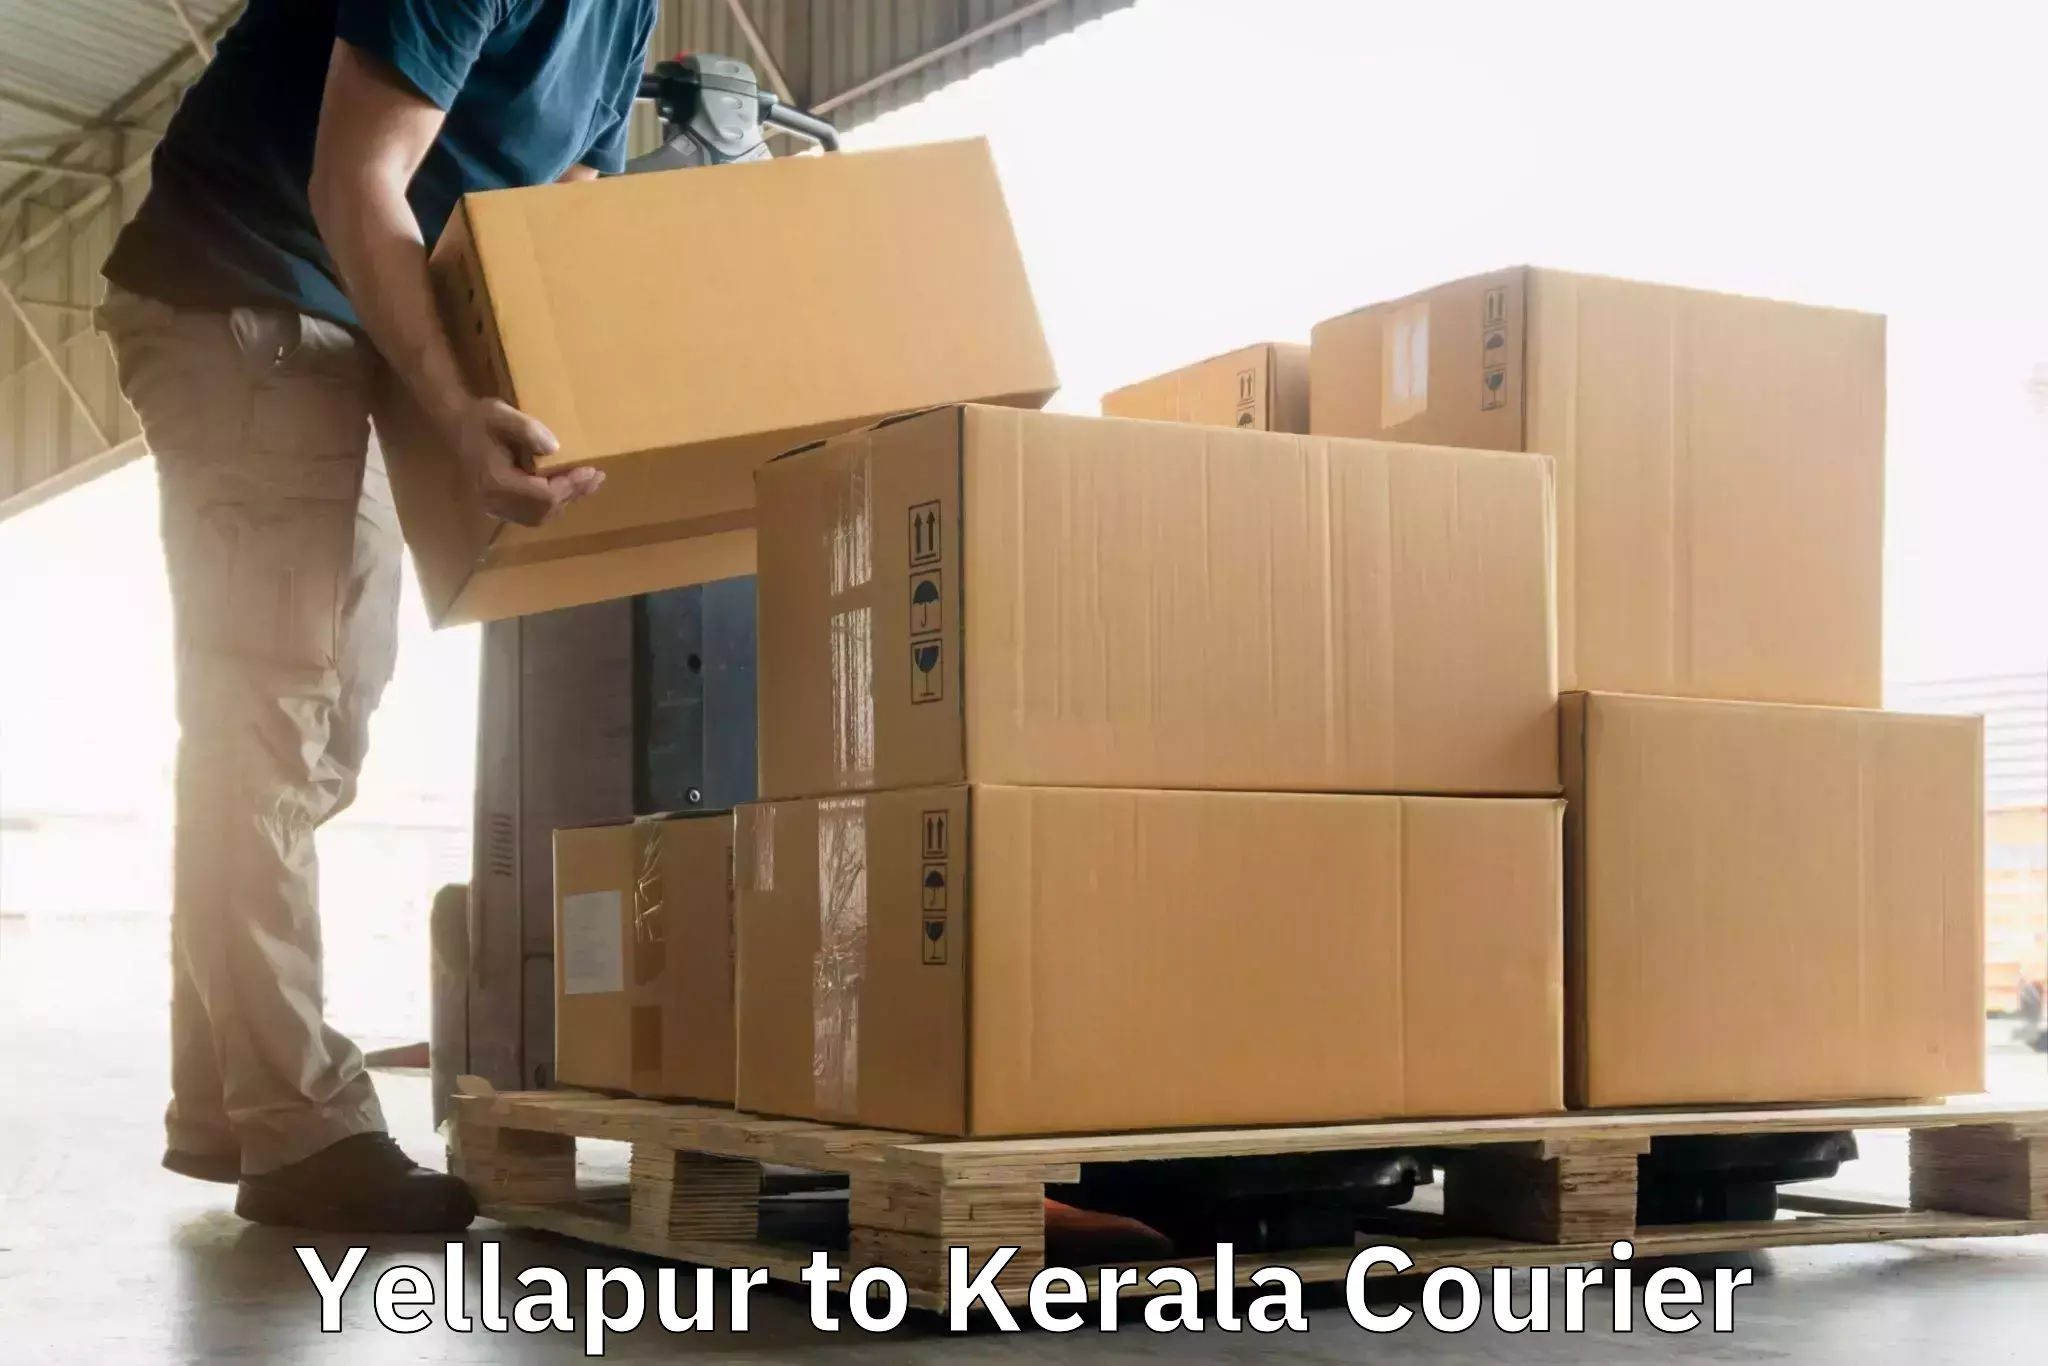 24-hour courier service Yellapur to Pala